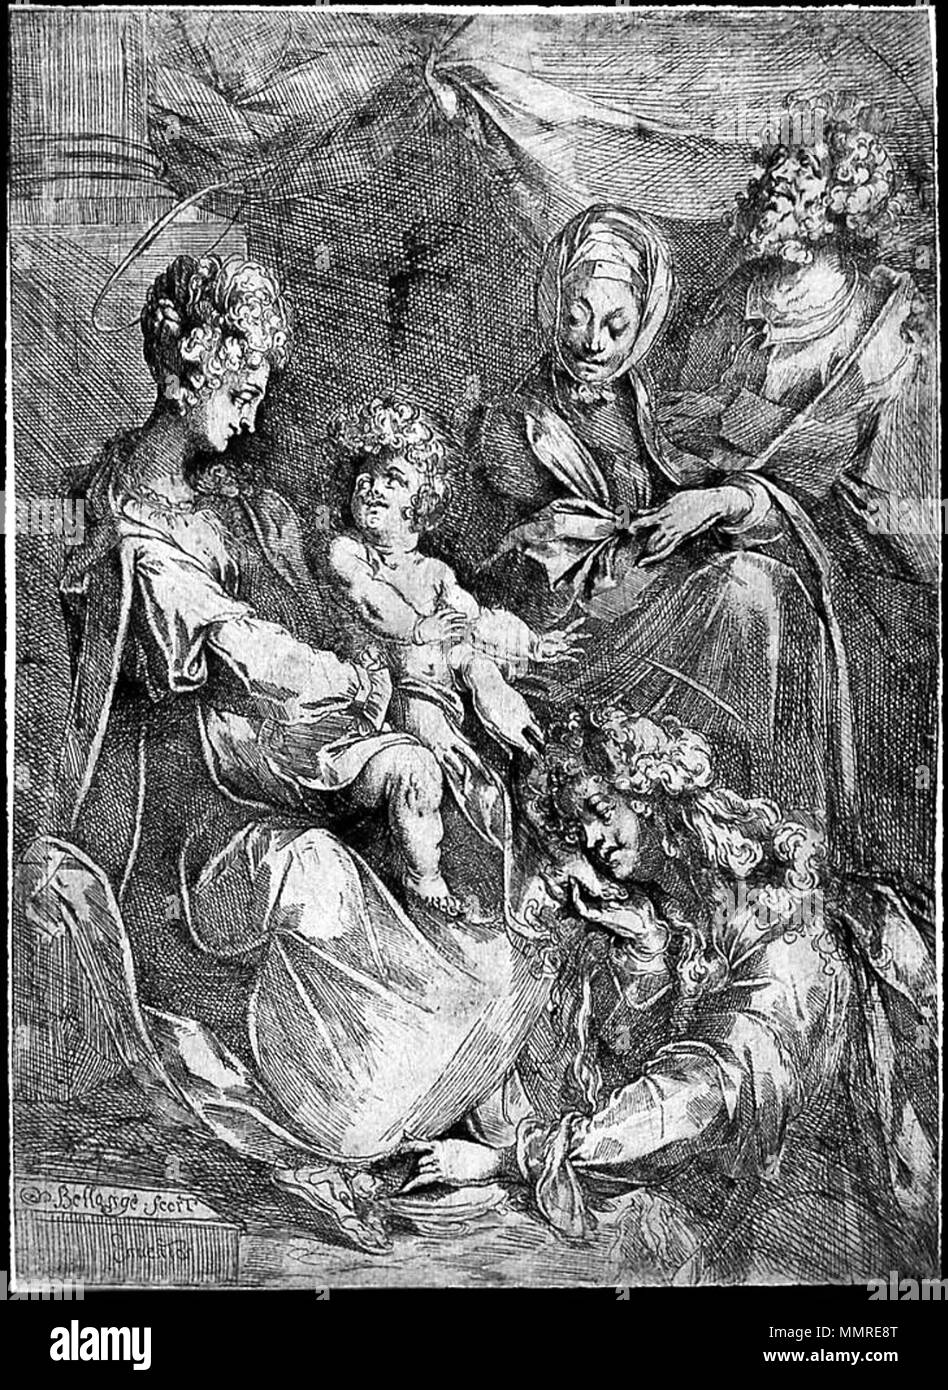 . English: The Virgin and Child with the Magdalen and Saint Anne Jacques Bellange, French (Lorraine), active in 1595, died in 1616 Platemark: 33.3 x 24.1 cm (13 1/8 x 9 1/2 in.); Sheet (cut within platemark) Etching, burin, and burnishing; first state Classification: Prints Catalogue: Robert-Dumesnil 10; rejected by Walch; Reed-Worthen 23; first state Accession number: 40.121 Otis Norcross Fund  . between 1600 and 1616.   Jacques Bellange  (1575–1616)     Alternative names Jacques de Bellange; Jacques Charles de Bellange; Jacques. Bellange; Jacques Belange; Charles Bellange; Jac. Bellange; Cha Stock Photo